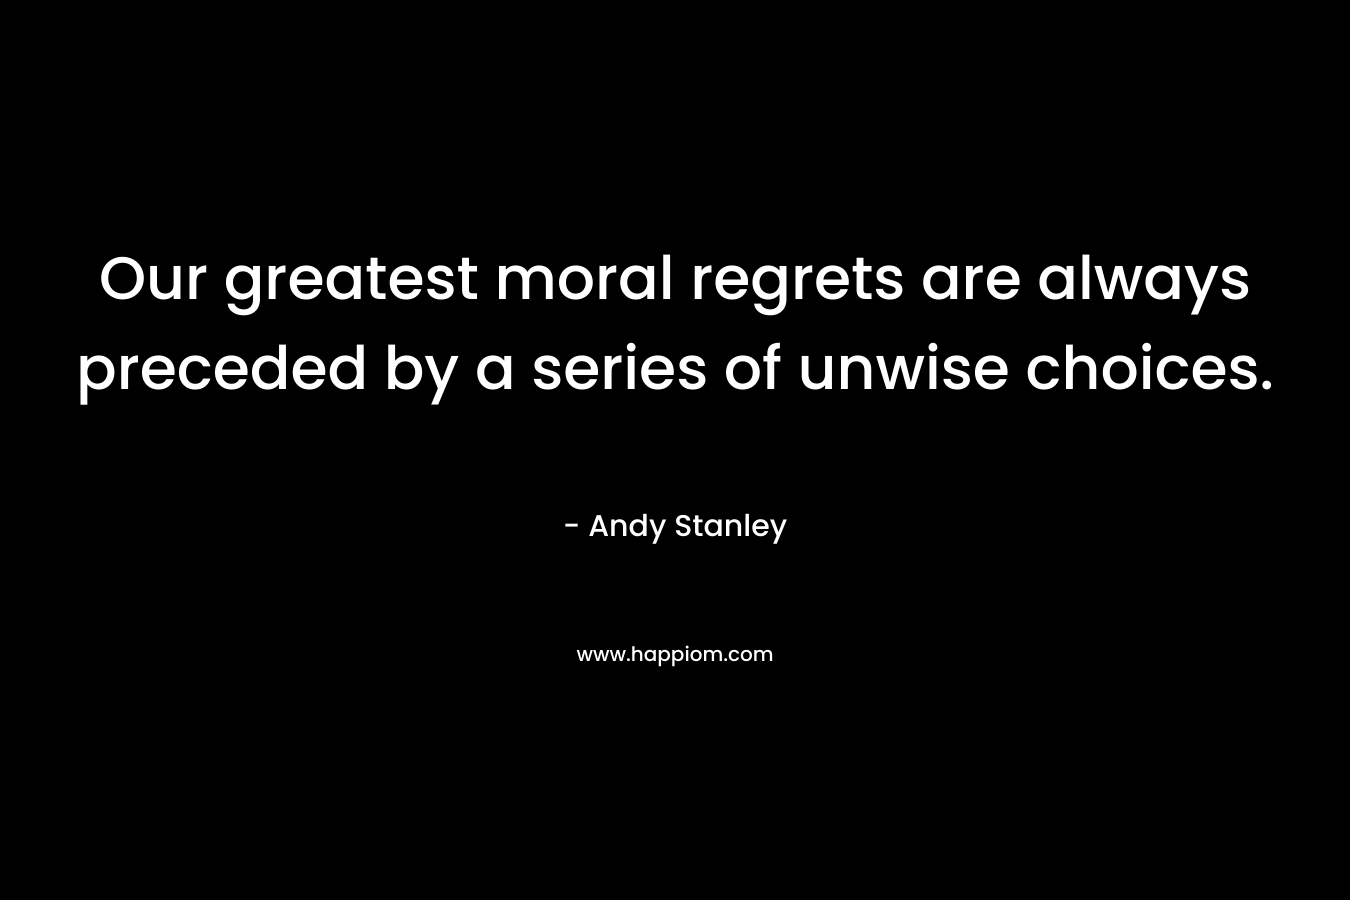 Our greatest moral regrets are always preceded by a series of unwise choices.